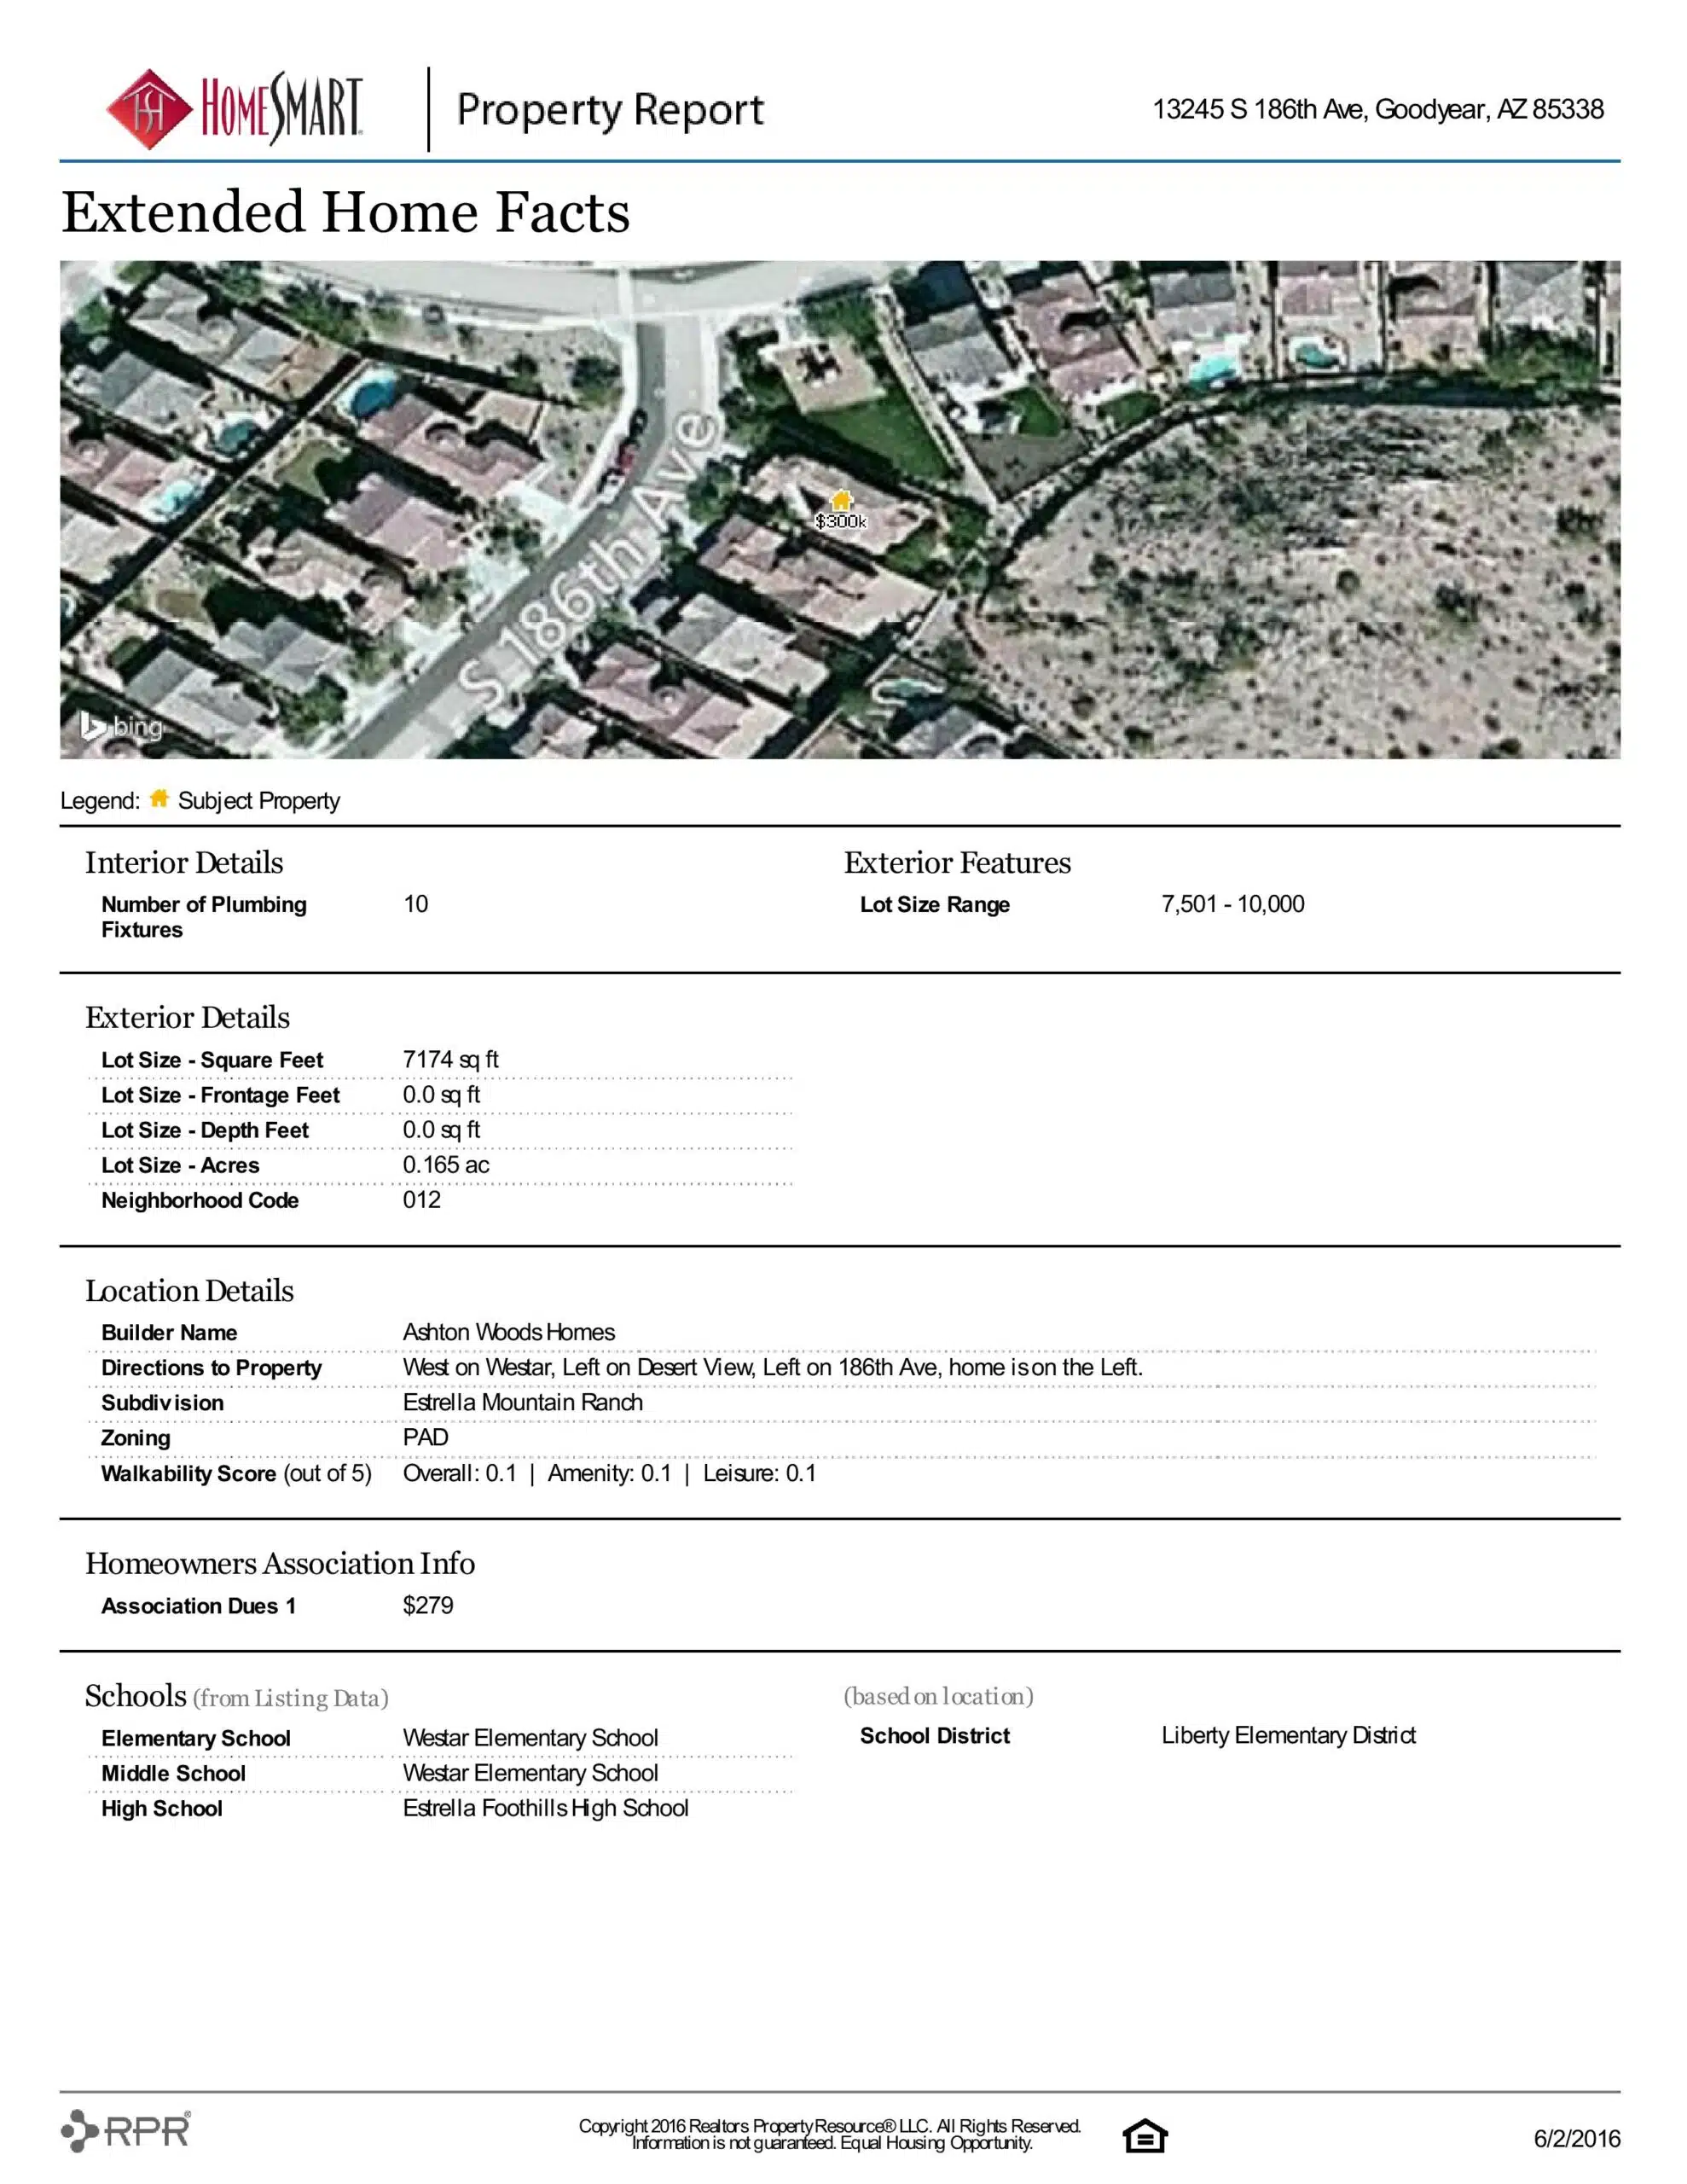 13245 S 186TH AVE PROPERTY REPORT-page-004